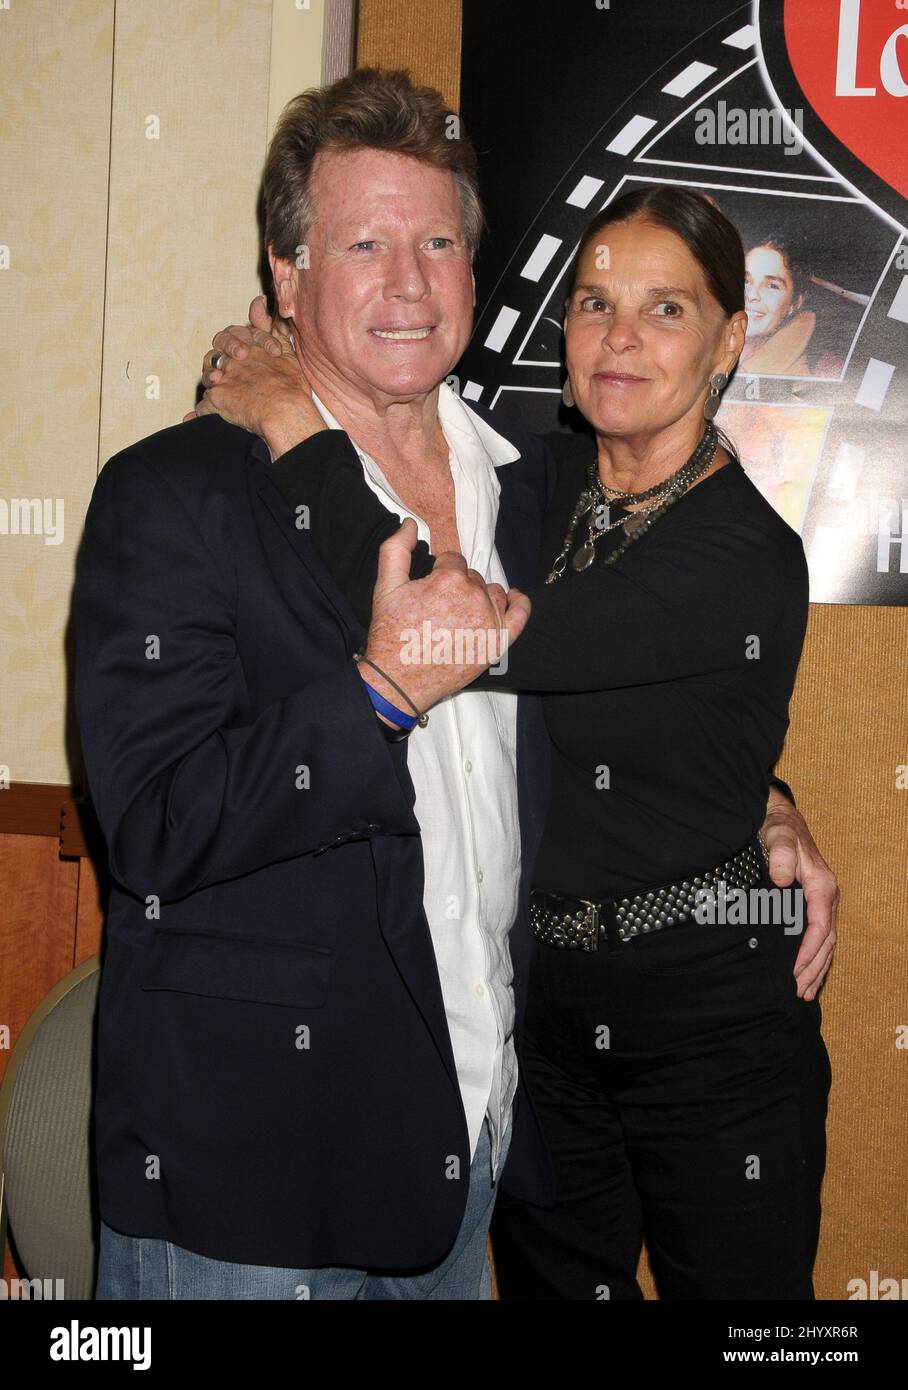 Ryan O'Neal and Ali MacGraw at the 'The Hollywood Show' Fall 2010 held at the Burbank Airport Marriott Hotel & Convention Center, Burbank, California Stock Photo